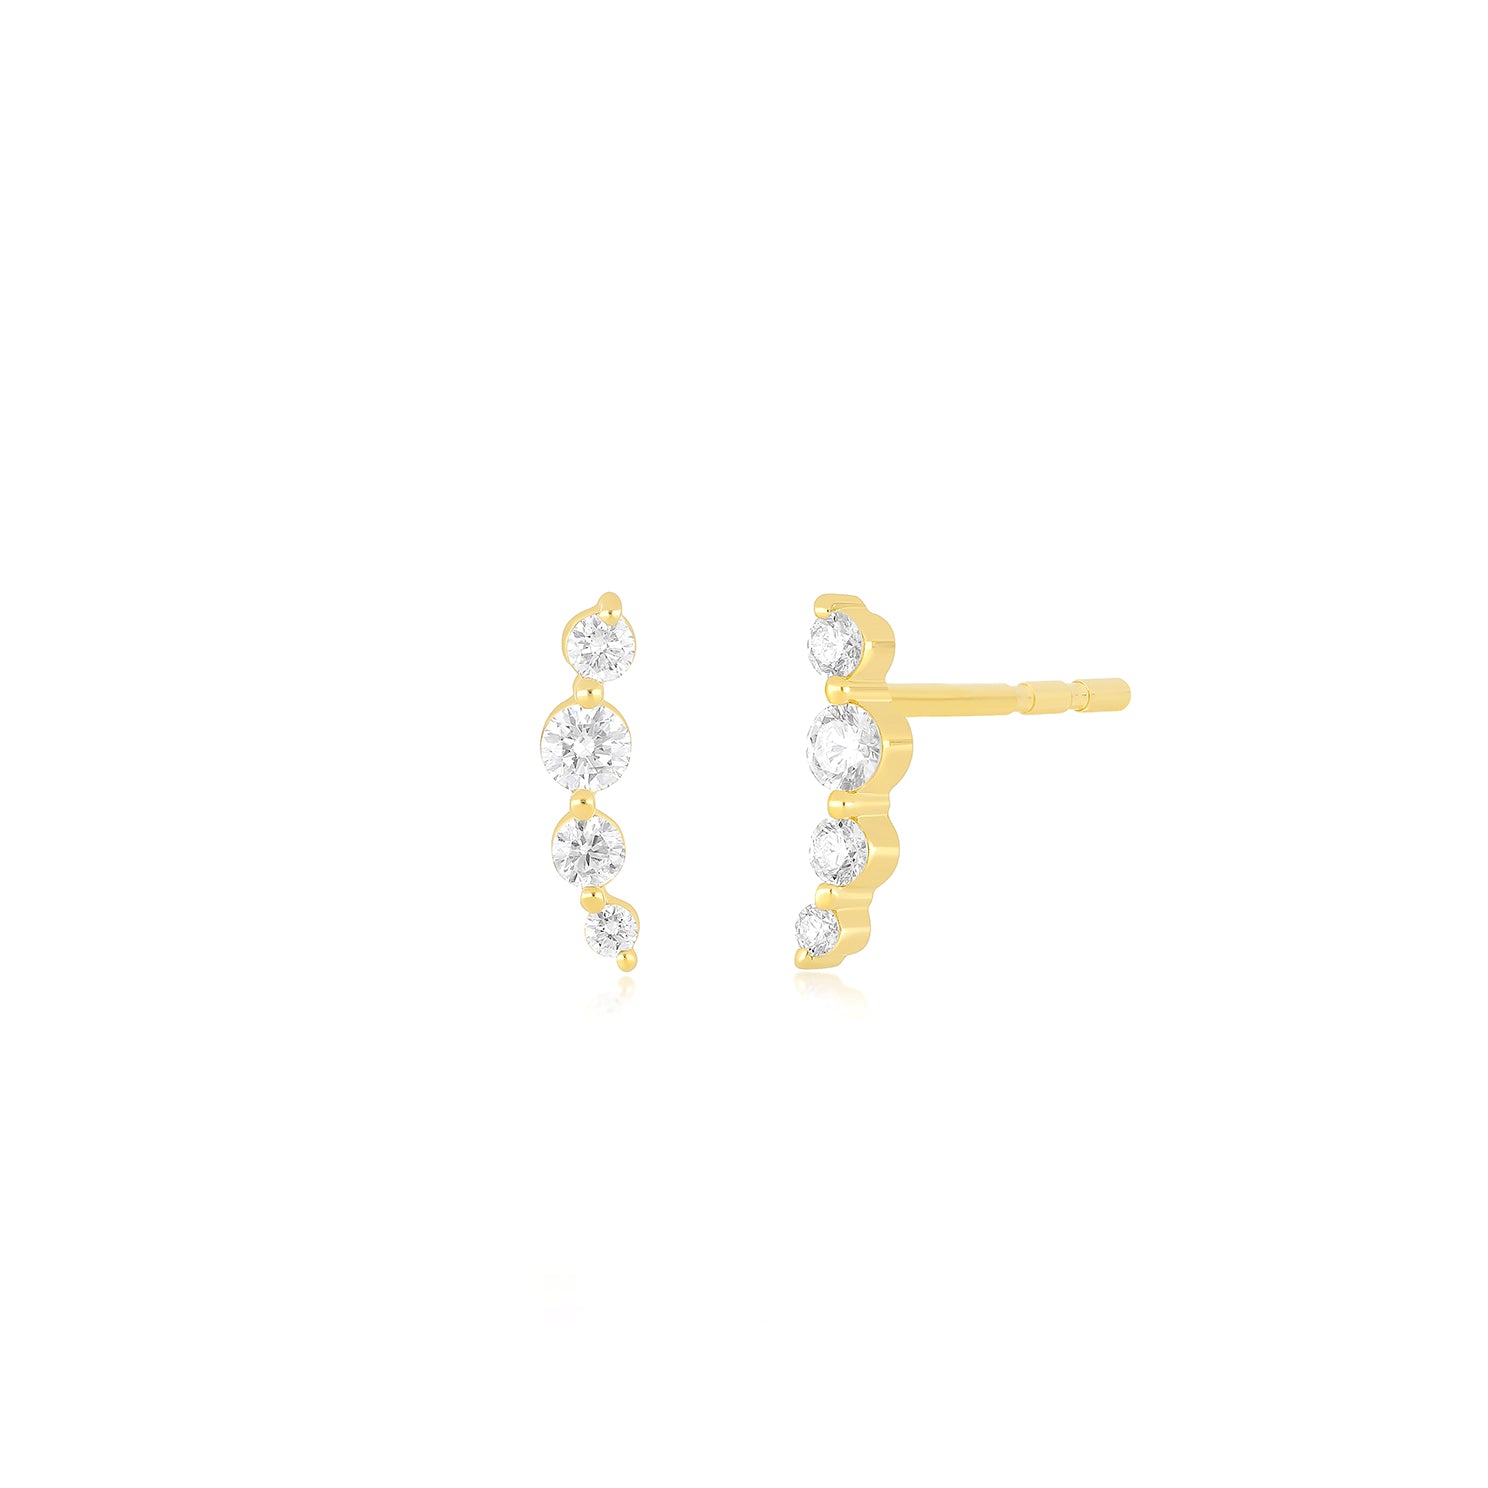 Love GOLD 9ct Gold 10mm Cubic Zirconia Stud Earrings | very.co.uk